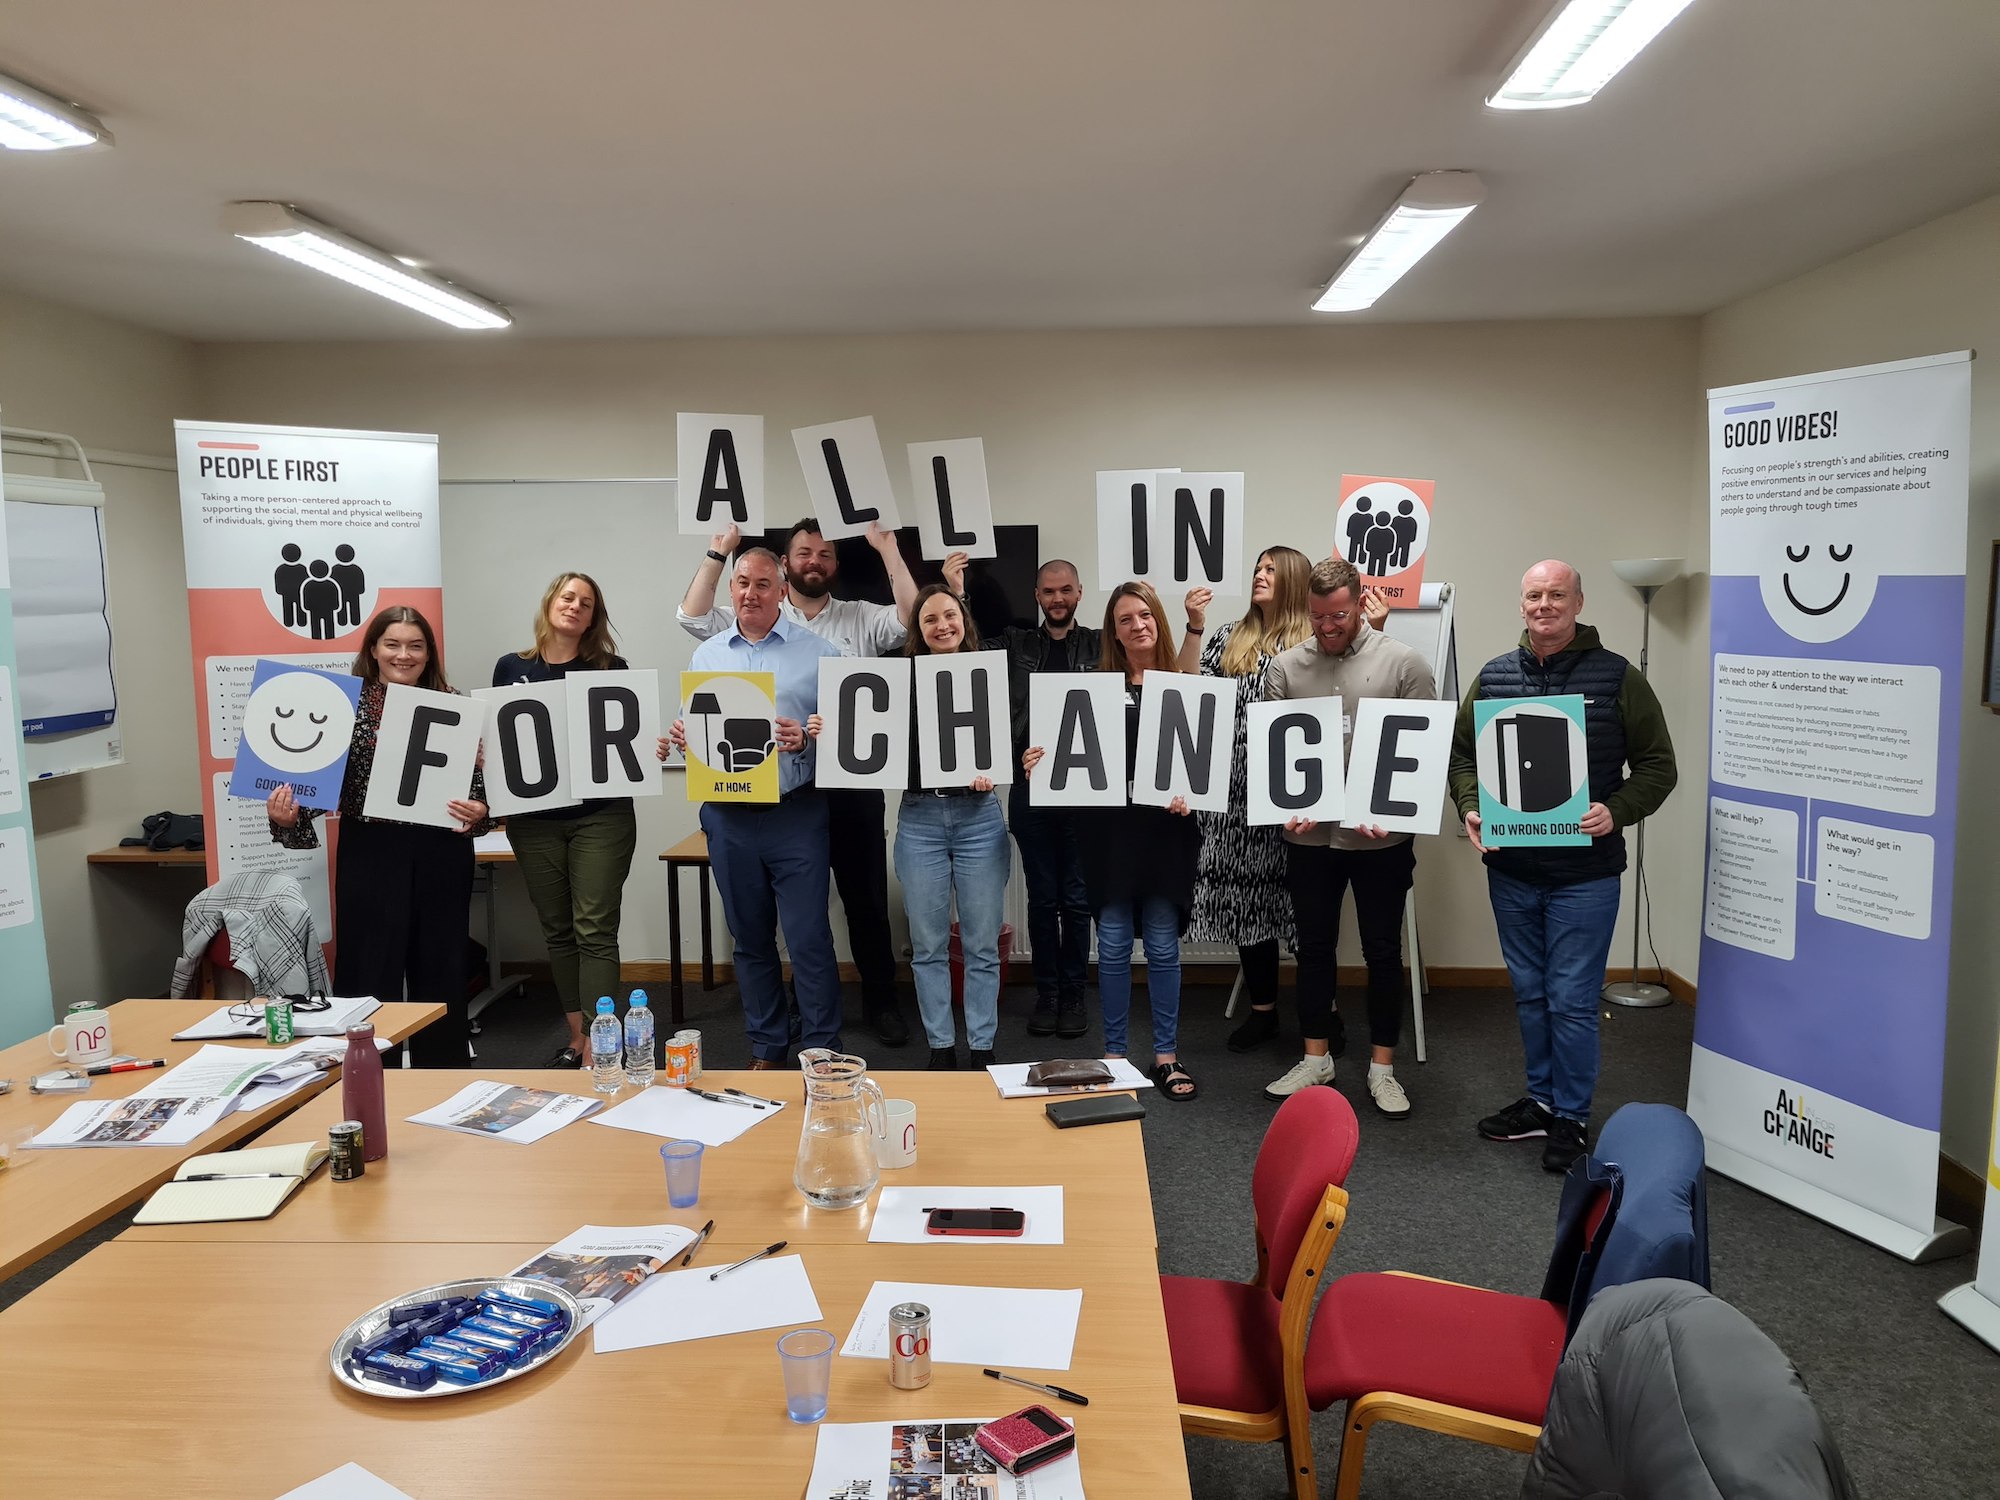 All in for Change hailed for 3 years of action and influence